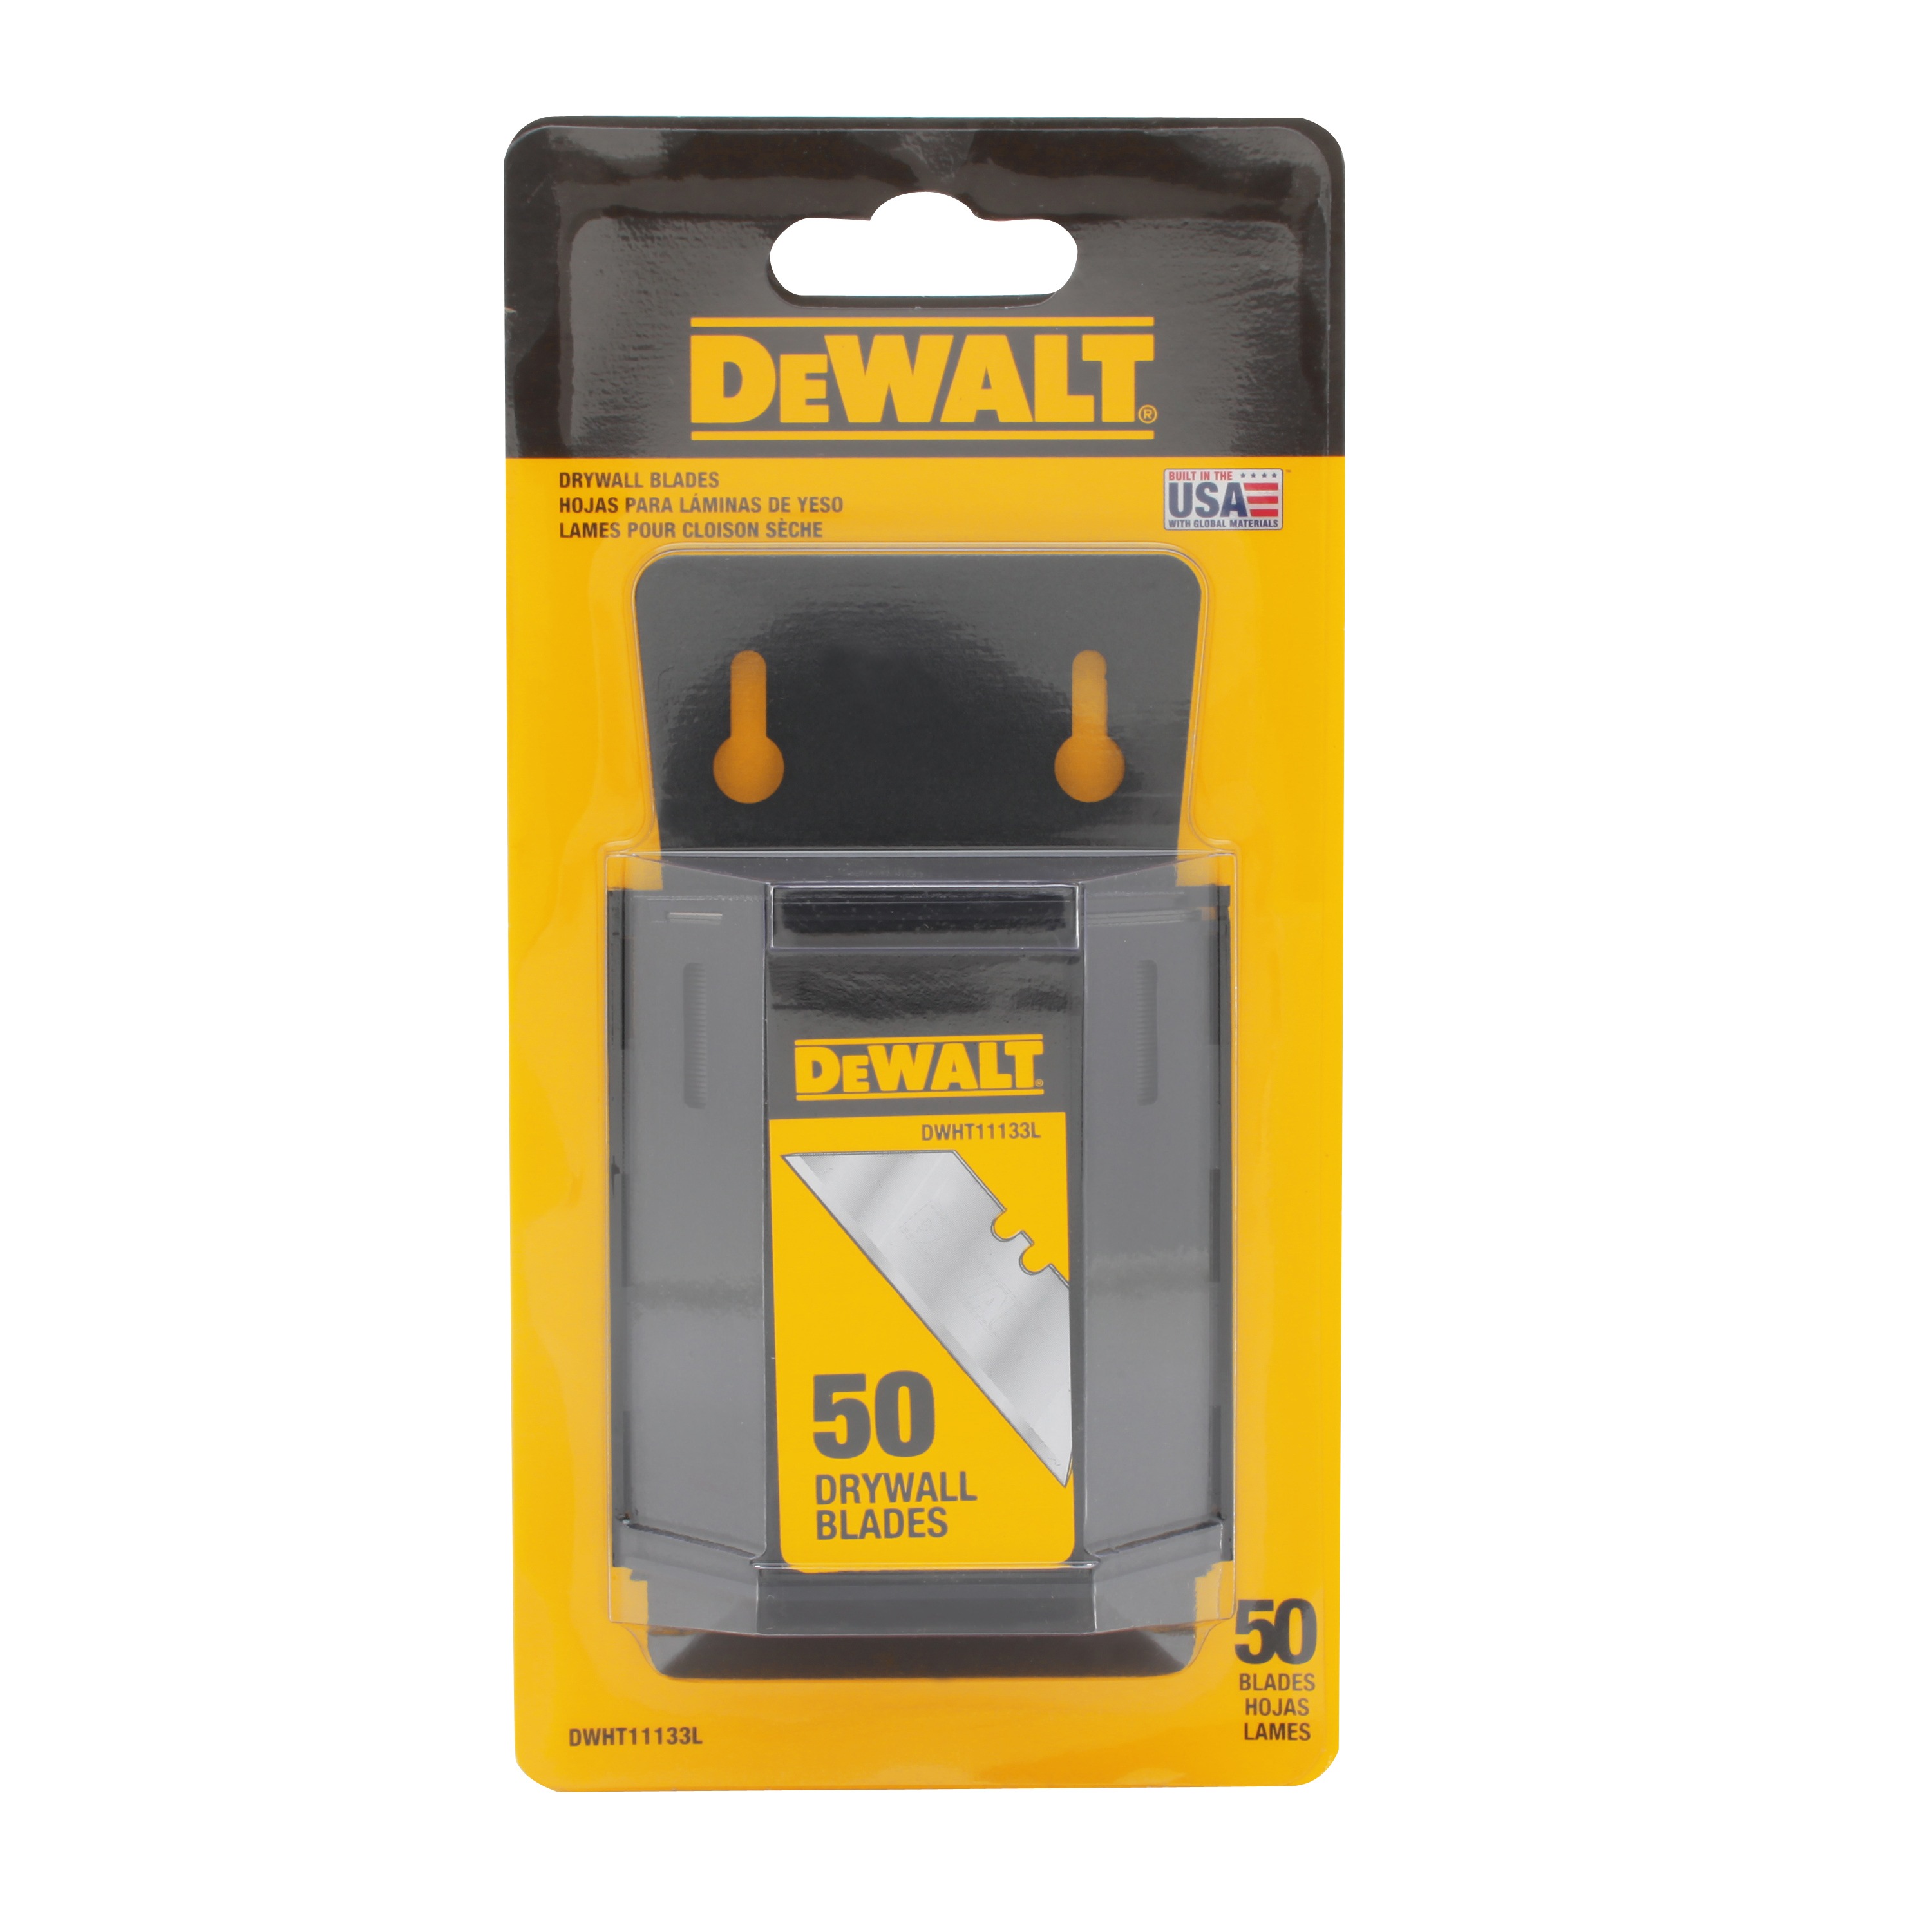 Drywall Blades 50 Pack in blister packaging. 